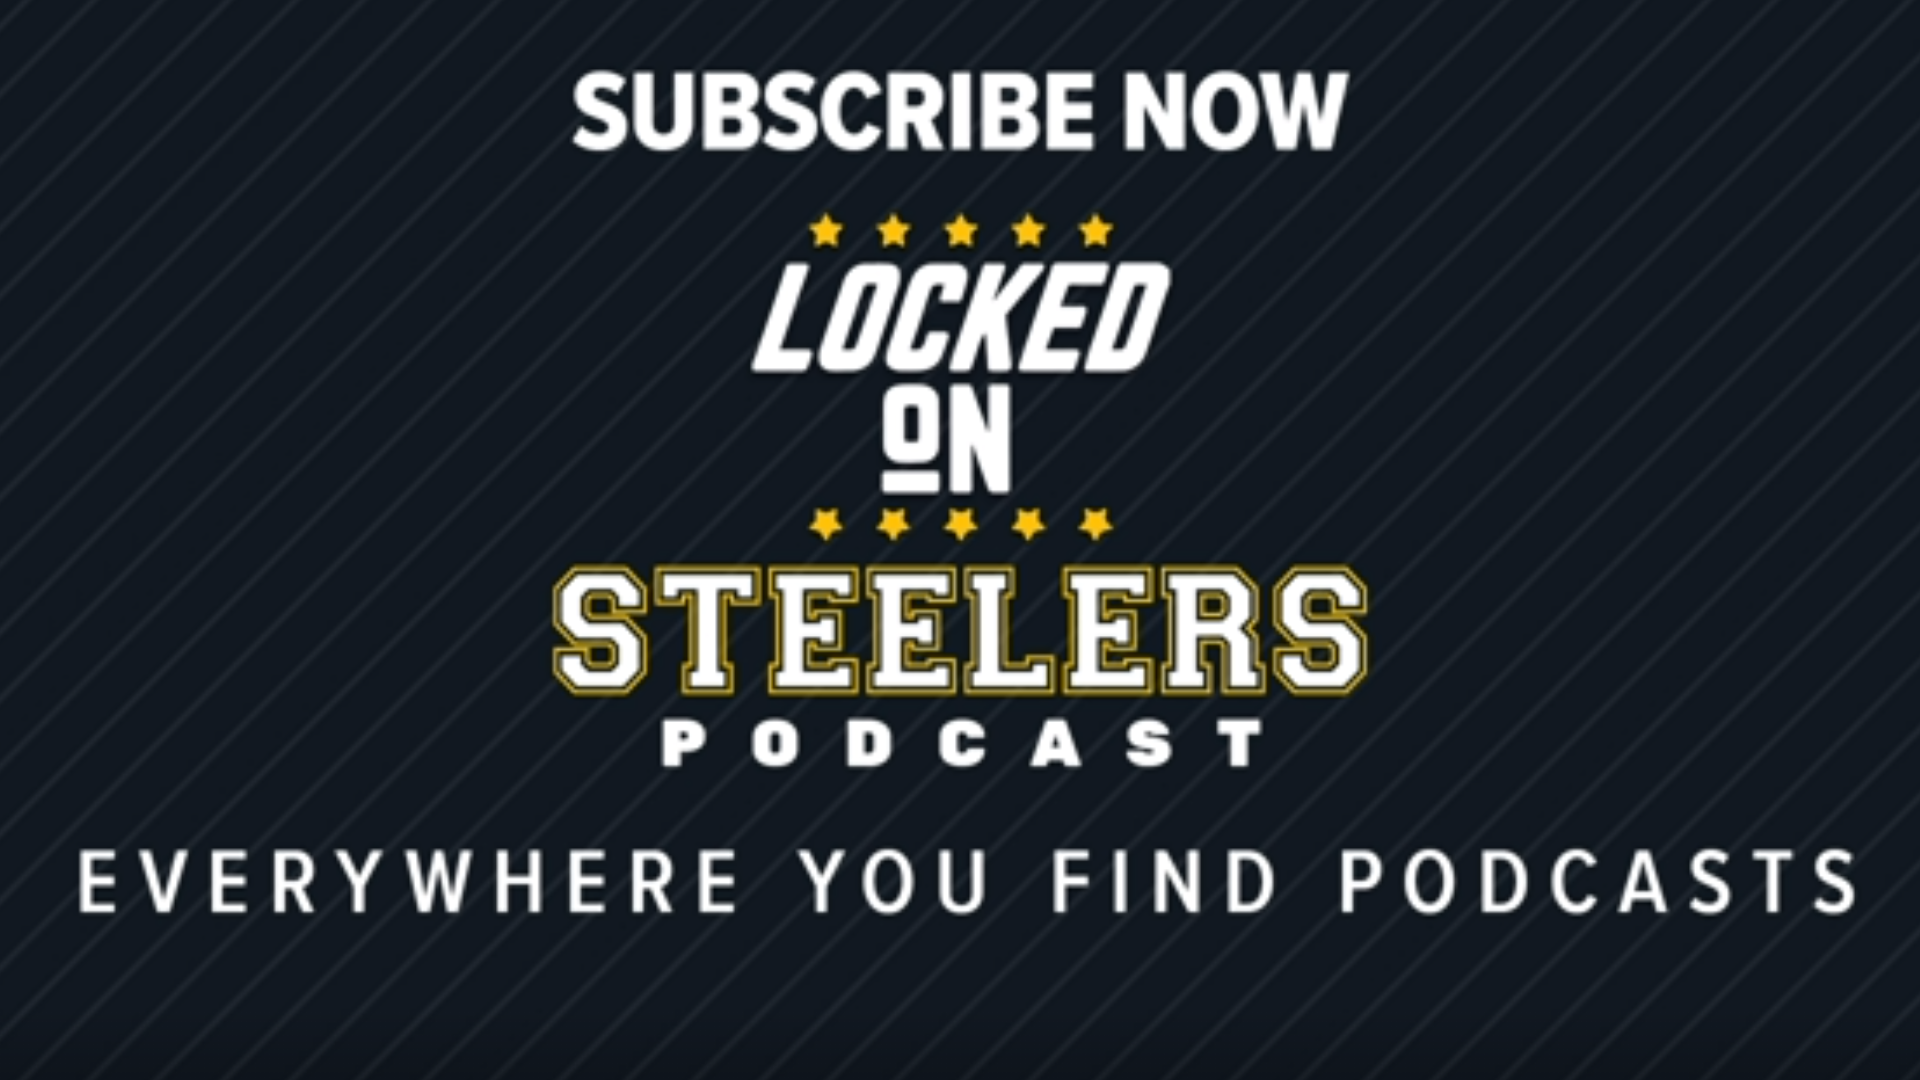 Chris Carter, the host of the Locked On Steelers podcast, offered his insight into what the team may do in the NFL Draft that begins Thursday night.